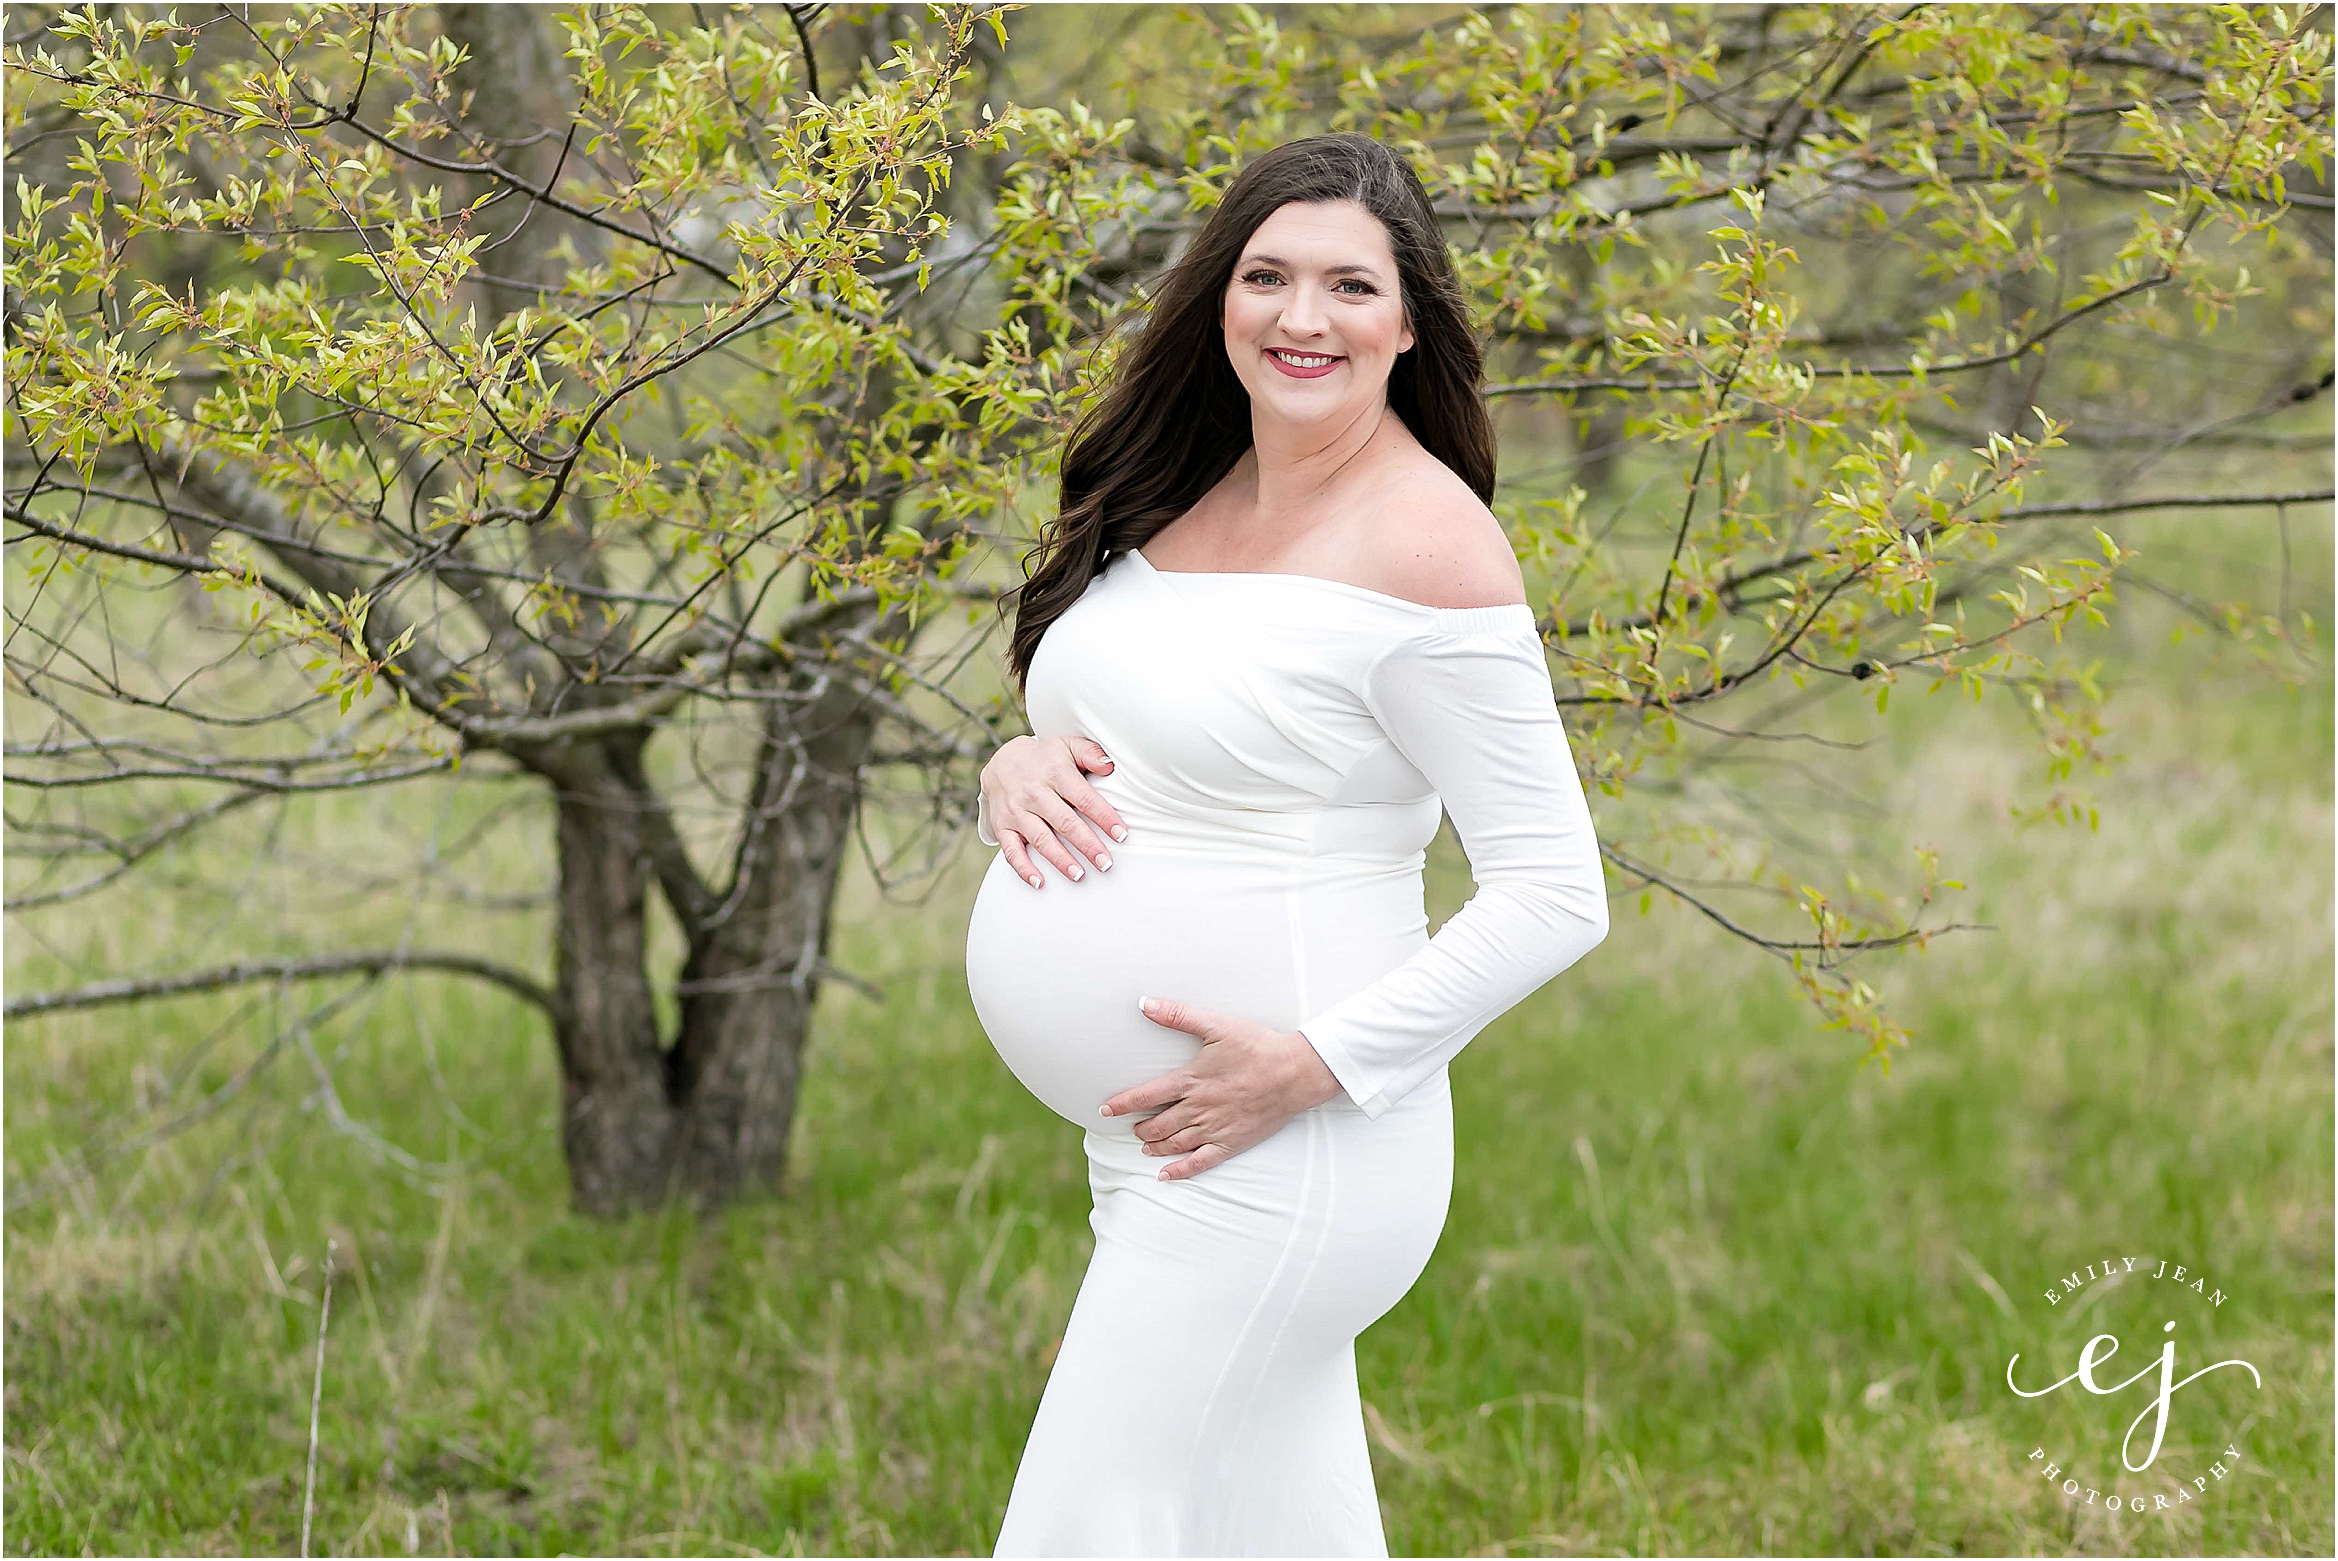 Spring maternity photo woman wearing white dress standing near a green tree